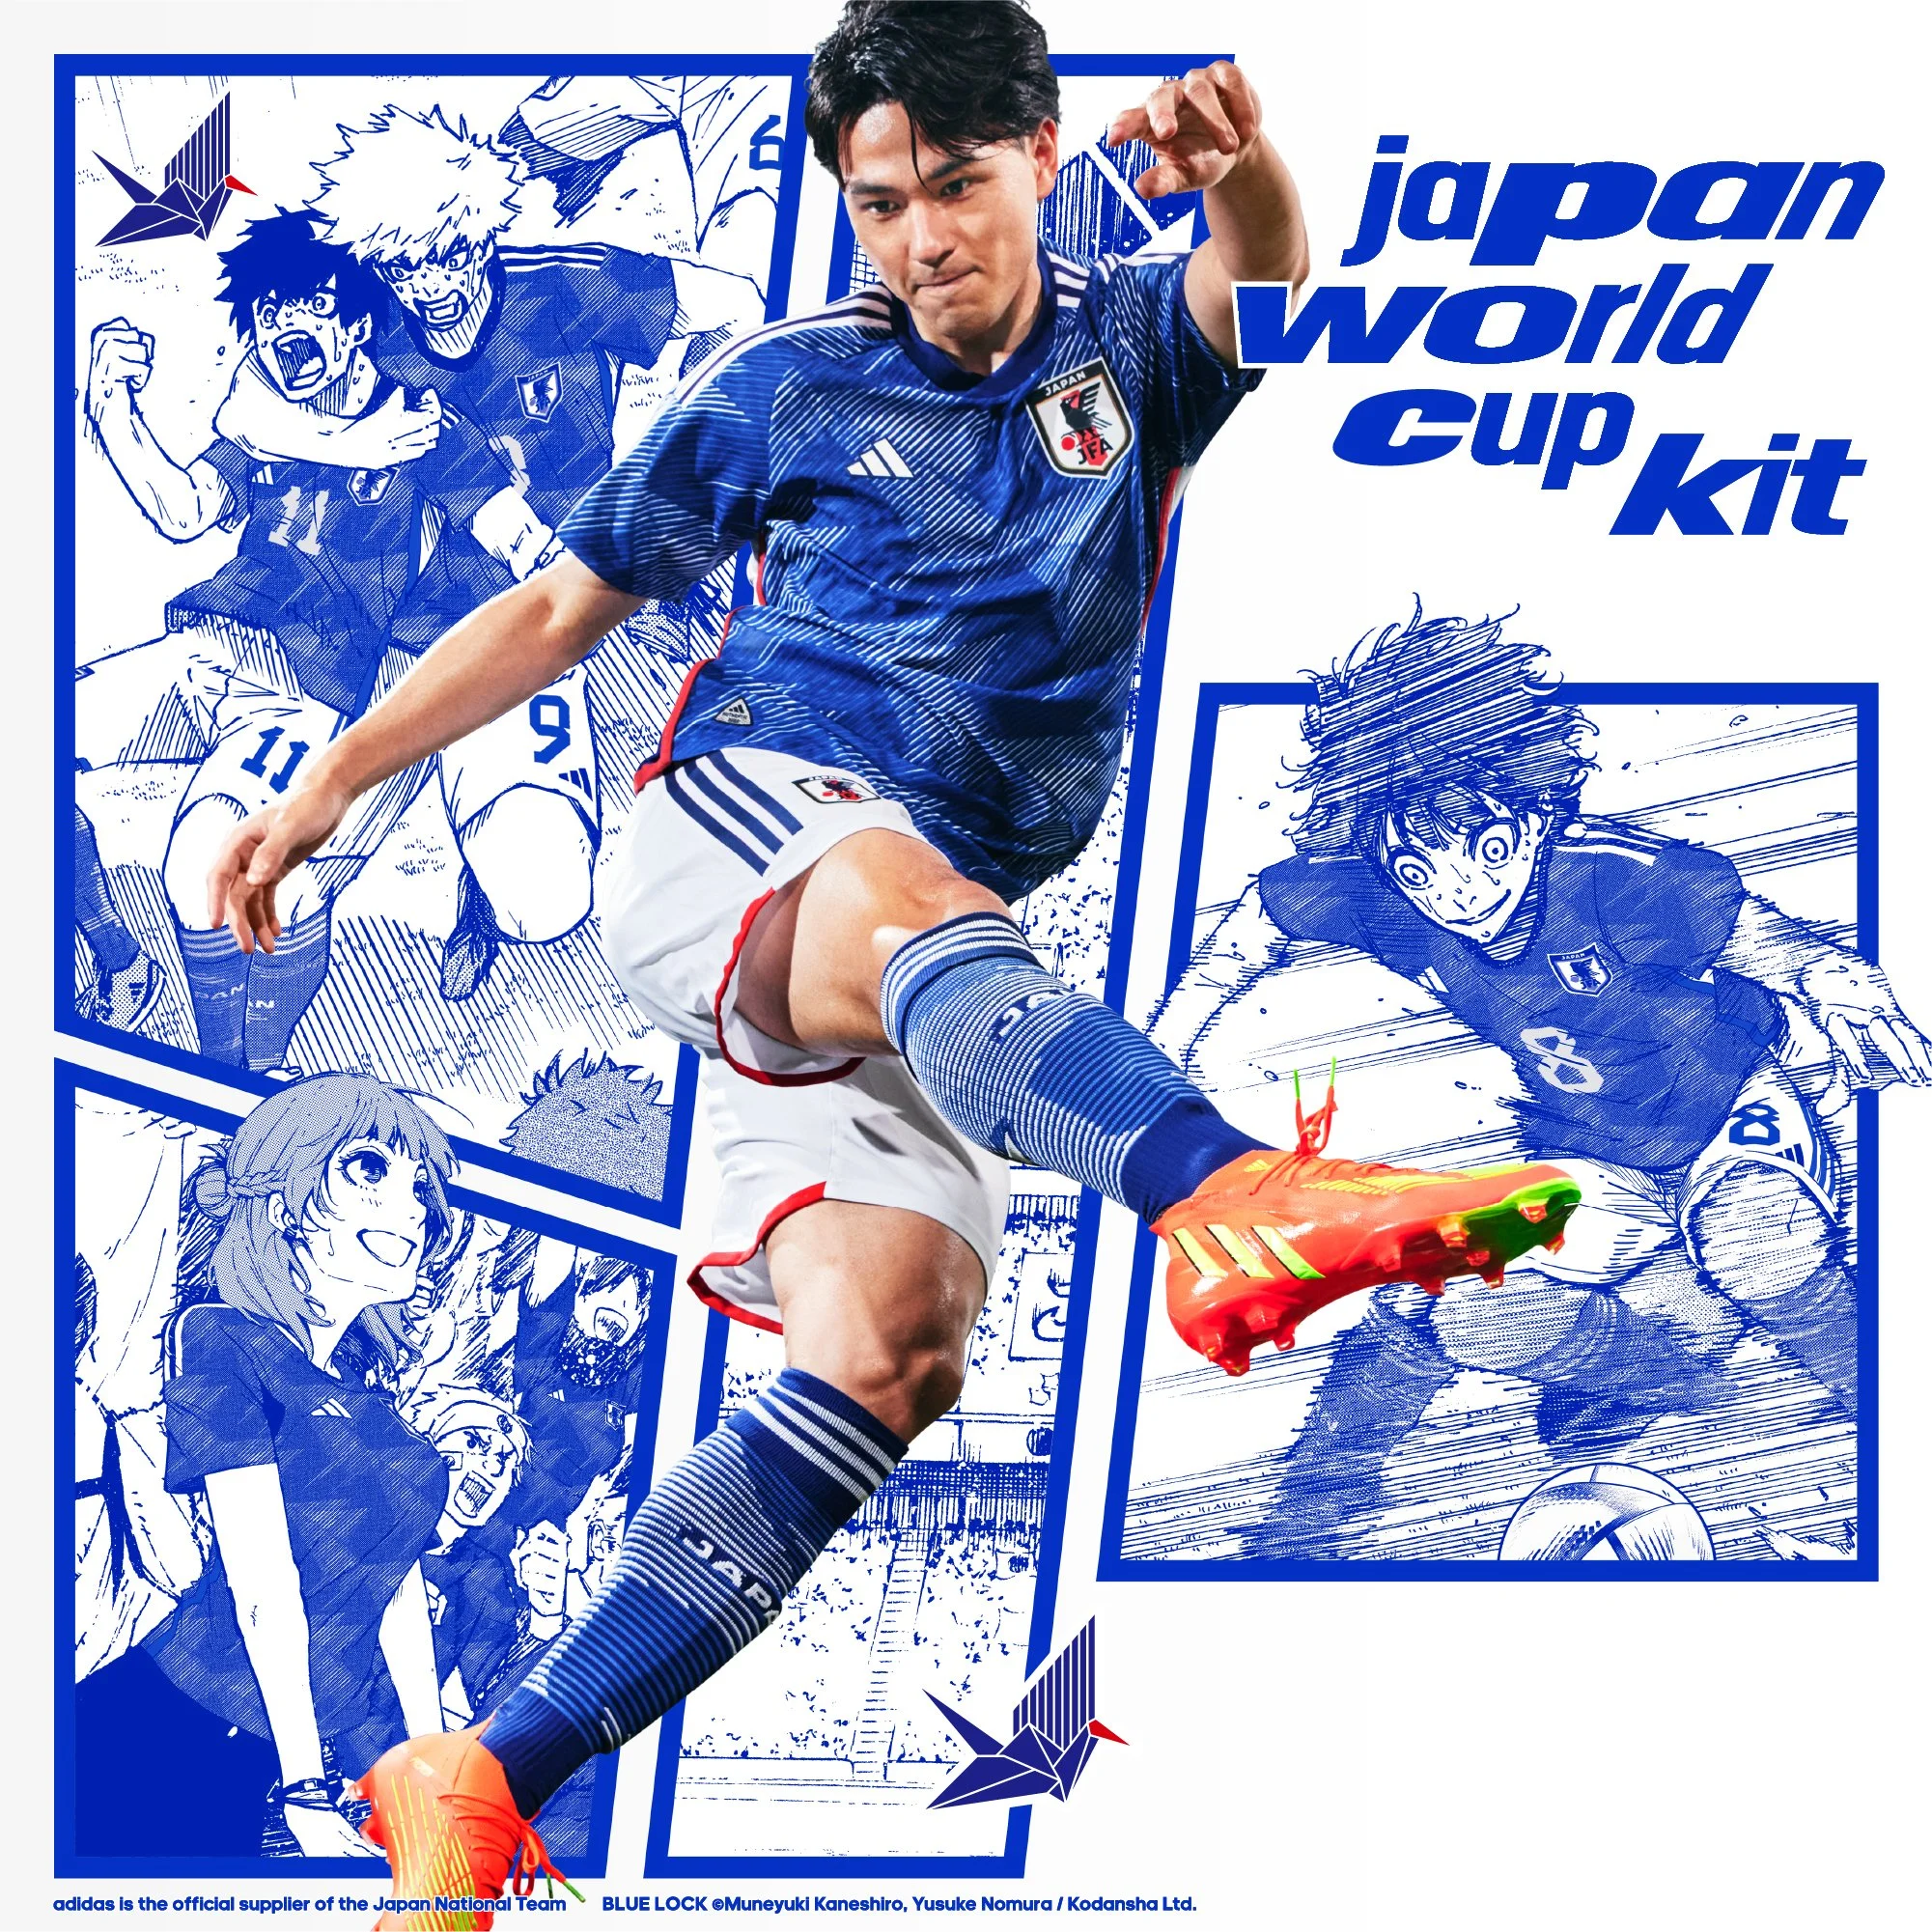 Japan makes World Cup miracles happen in Blue Lock jerseys  ONE Esports